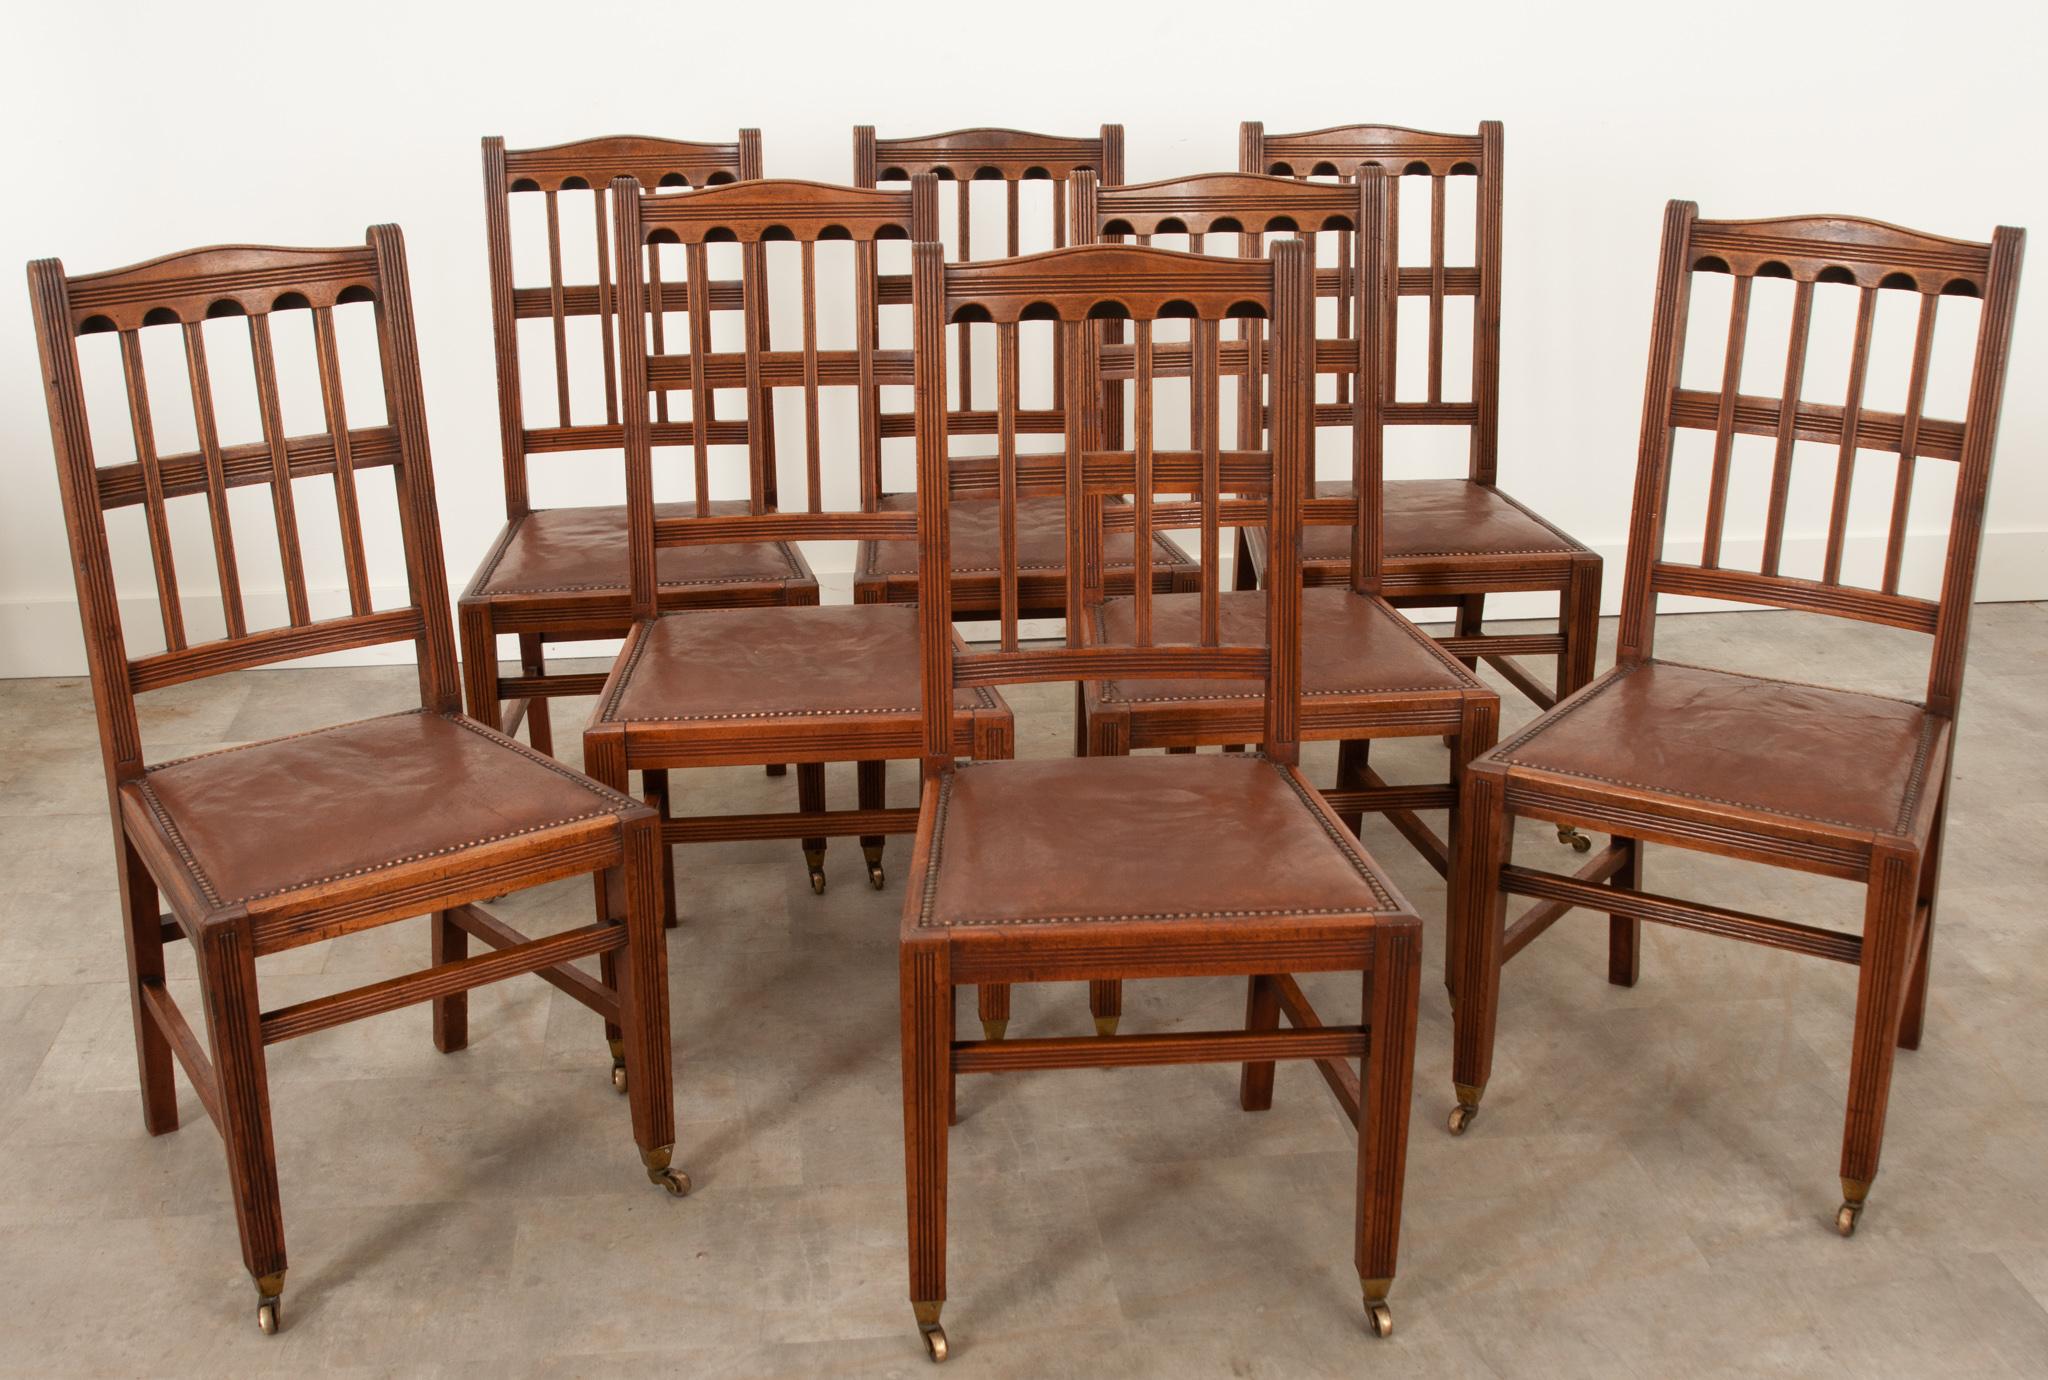 English set of eight arts and crafts dining chairs of impressive design and condition from the 1860’s. The geometric carvings are thoughtfully designed and implemented. Worn leather seats with nailhead trim are comfortable and generous in size. The